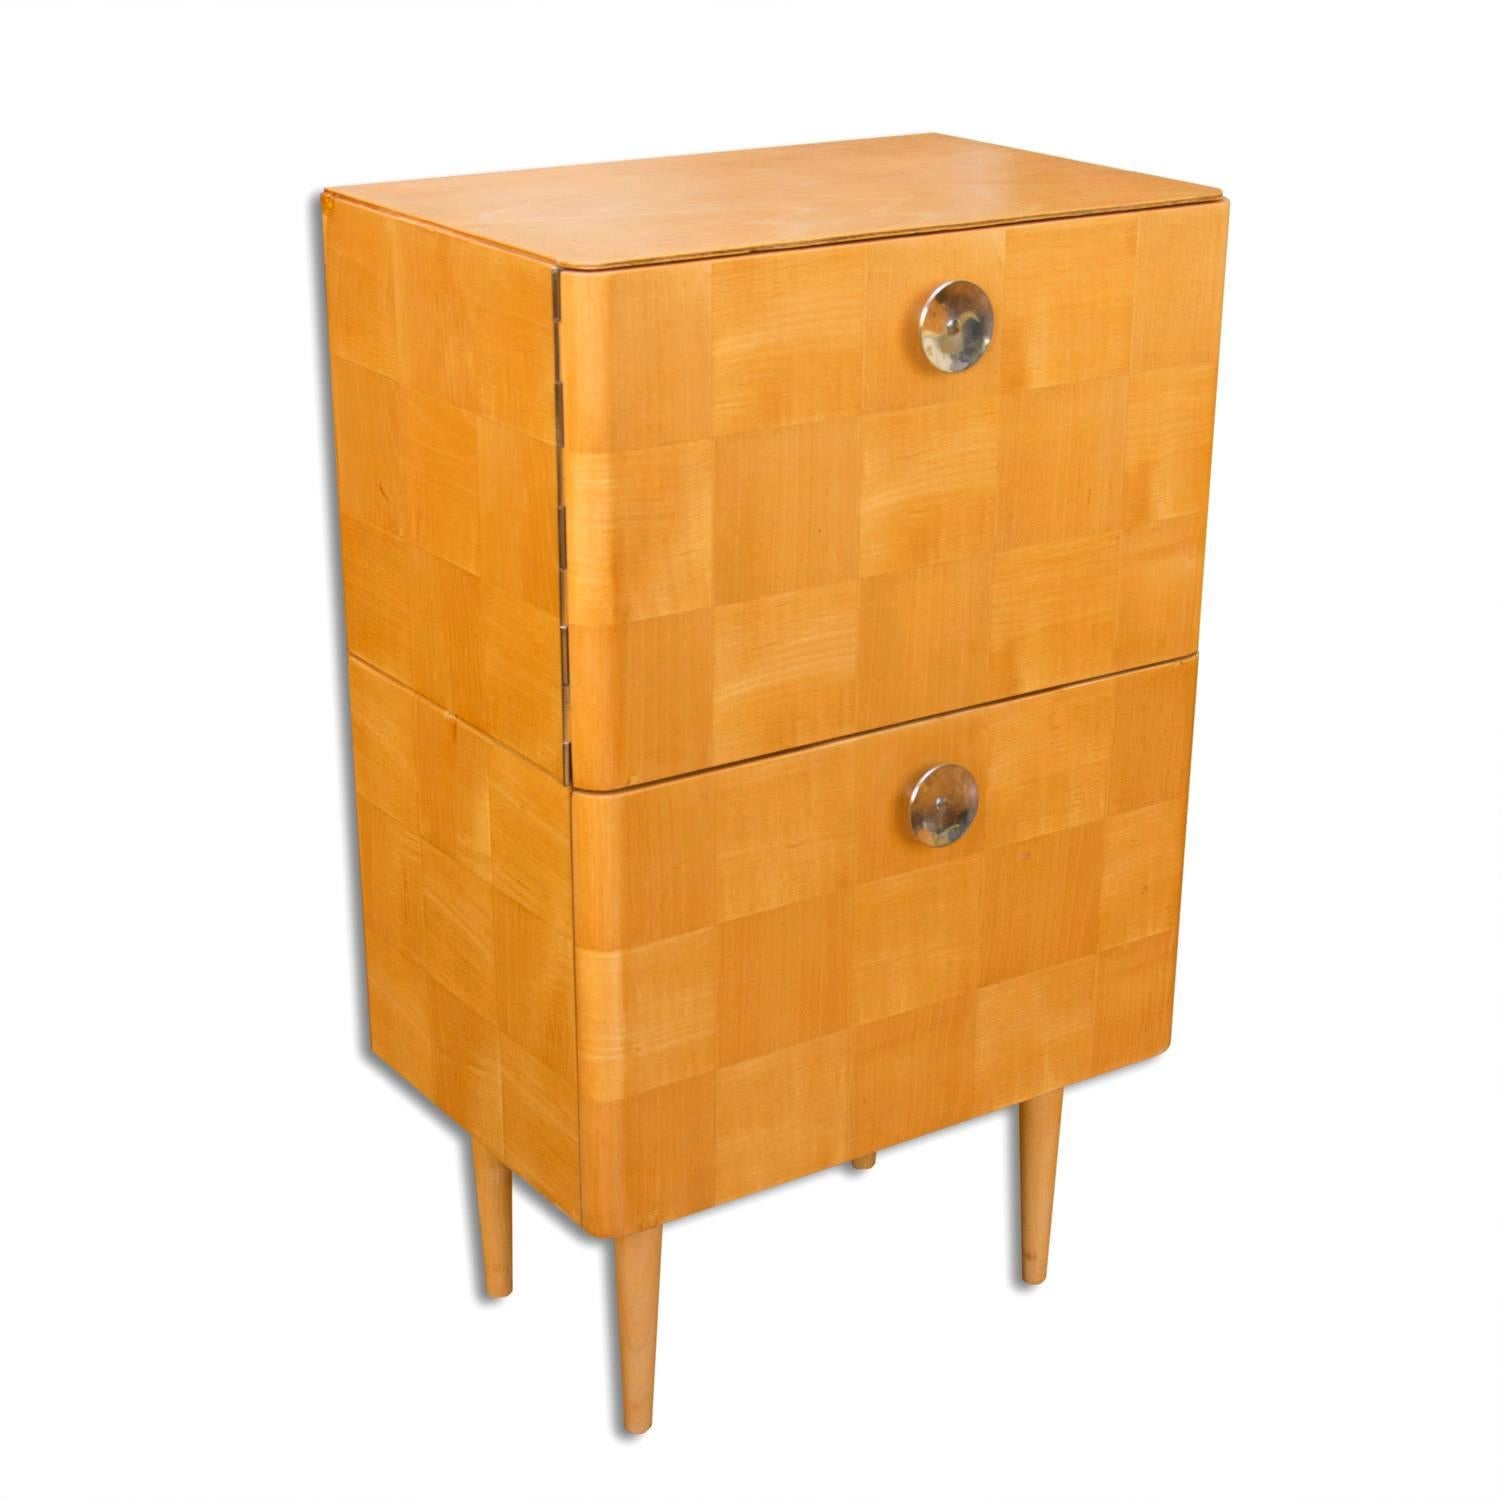 Mid-Century Modern Midcentury Small Commode or Bedside Table, Attribute to Jindrich Halabala, 1950s